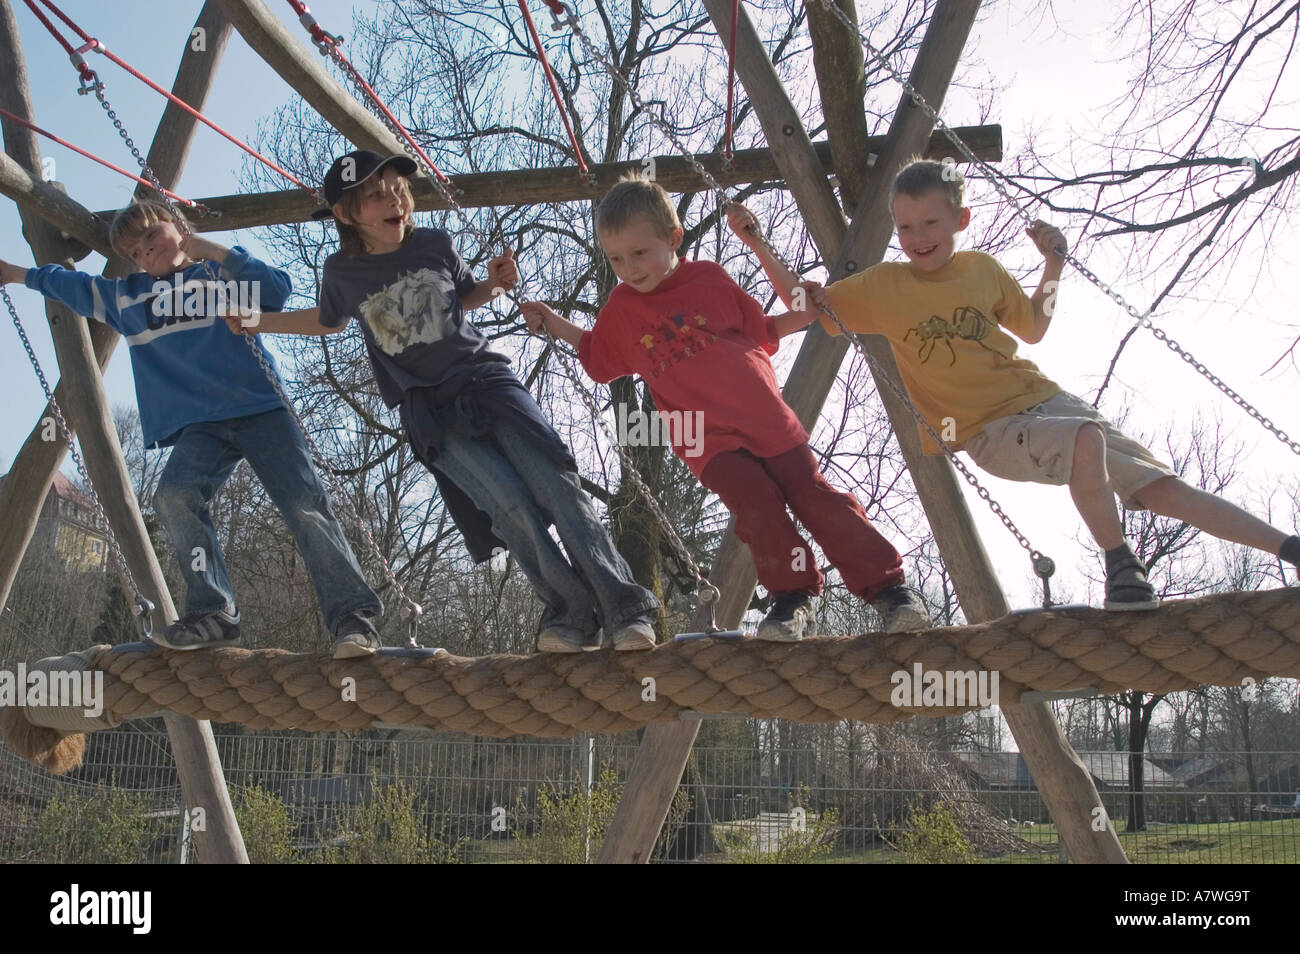 Four children on a large swing Stock Photo